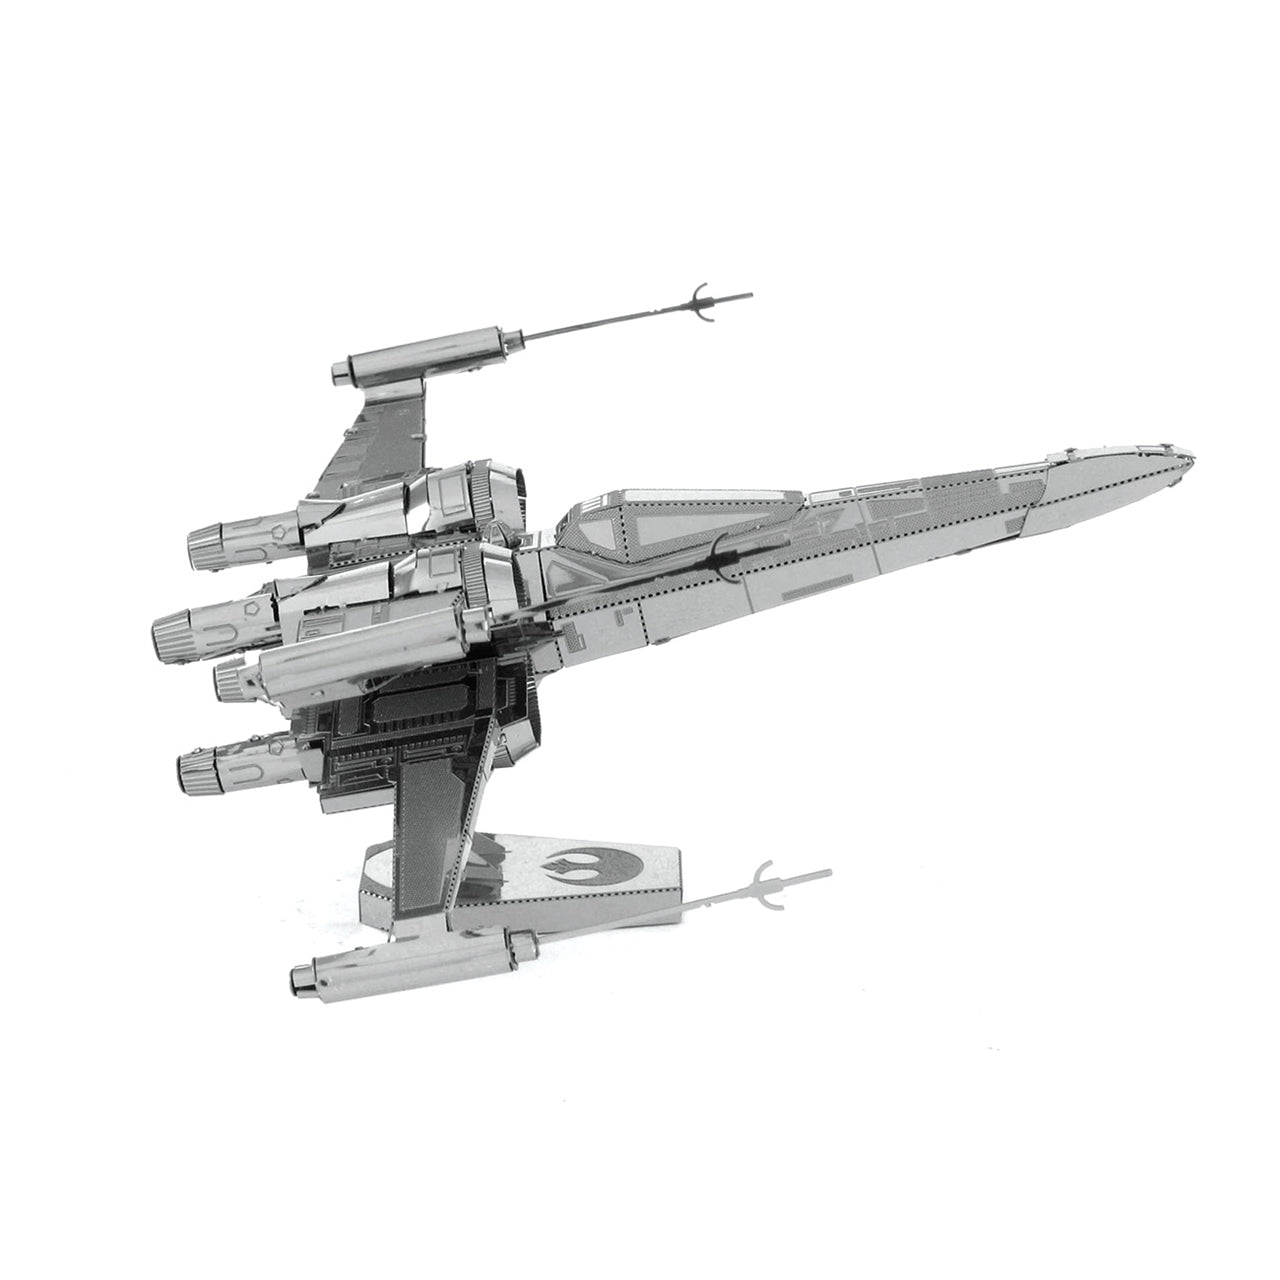 FMW269 Poe Dameron X-Wing Fighter (Buildable) 